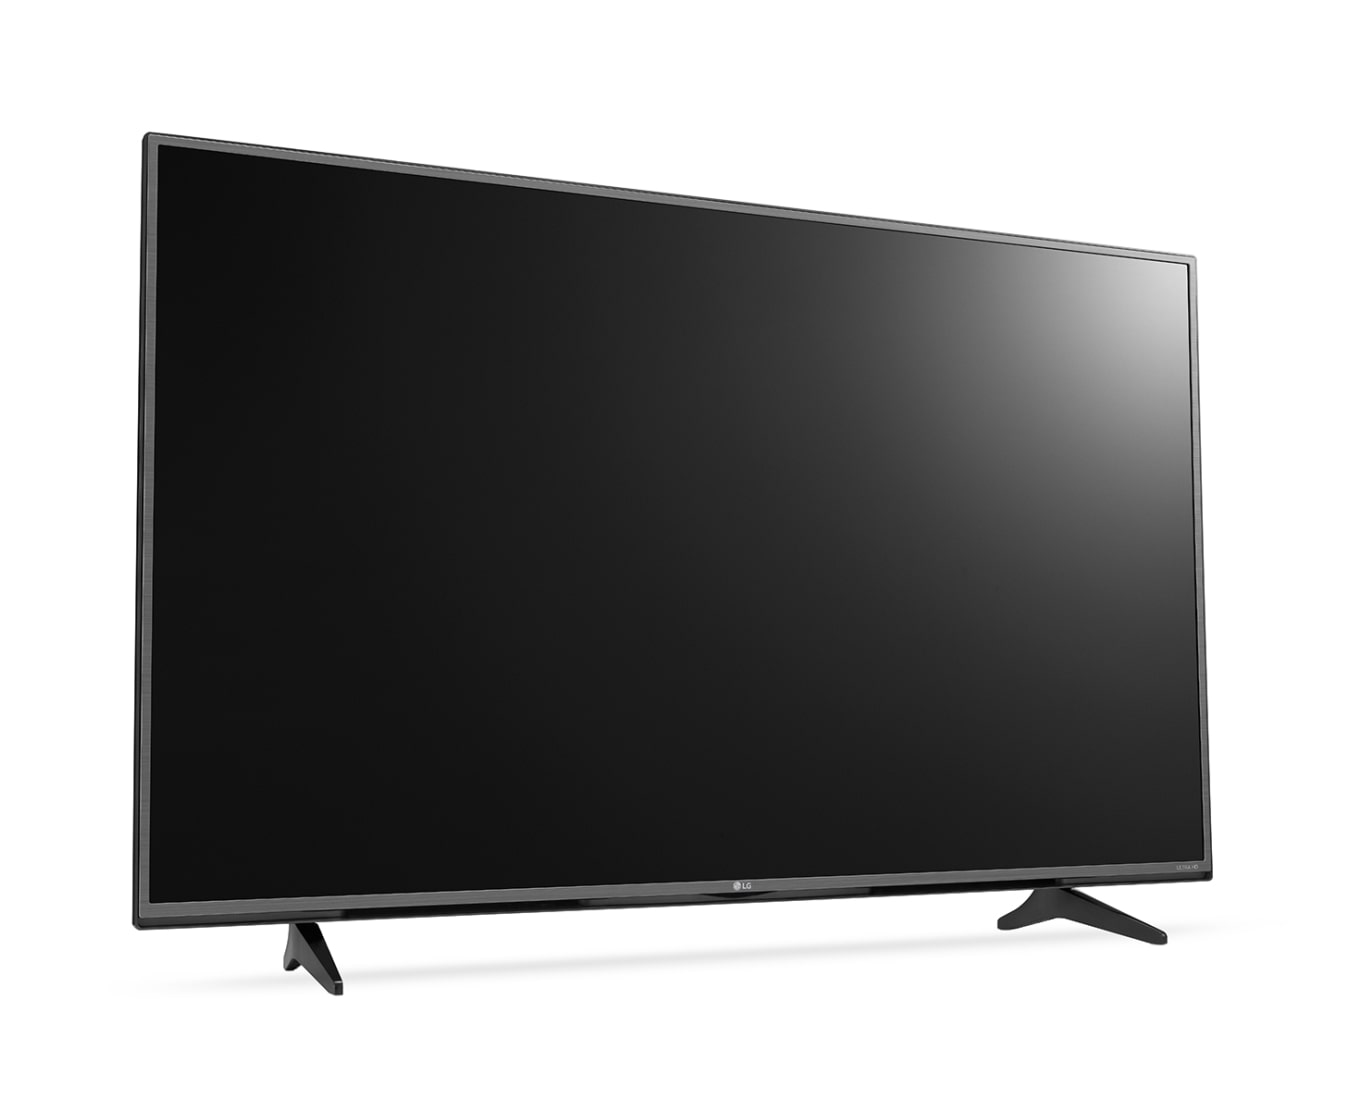 55UF680T – This 4K Ultra HD TV features a powerful Quad Core 